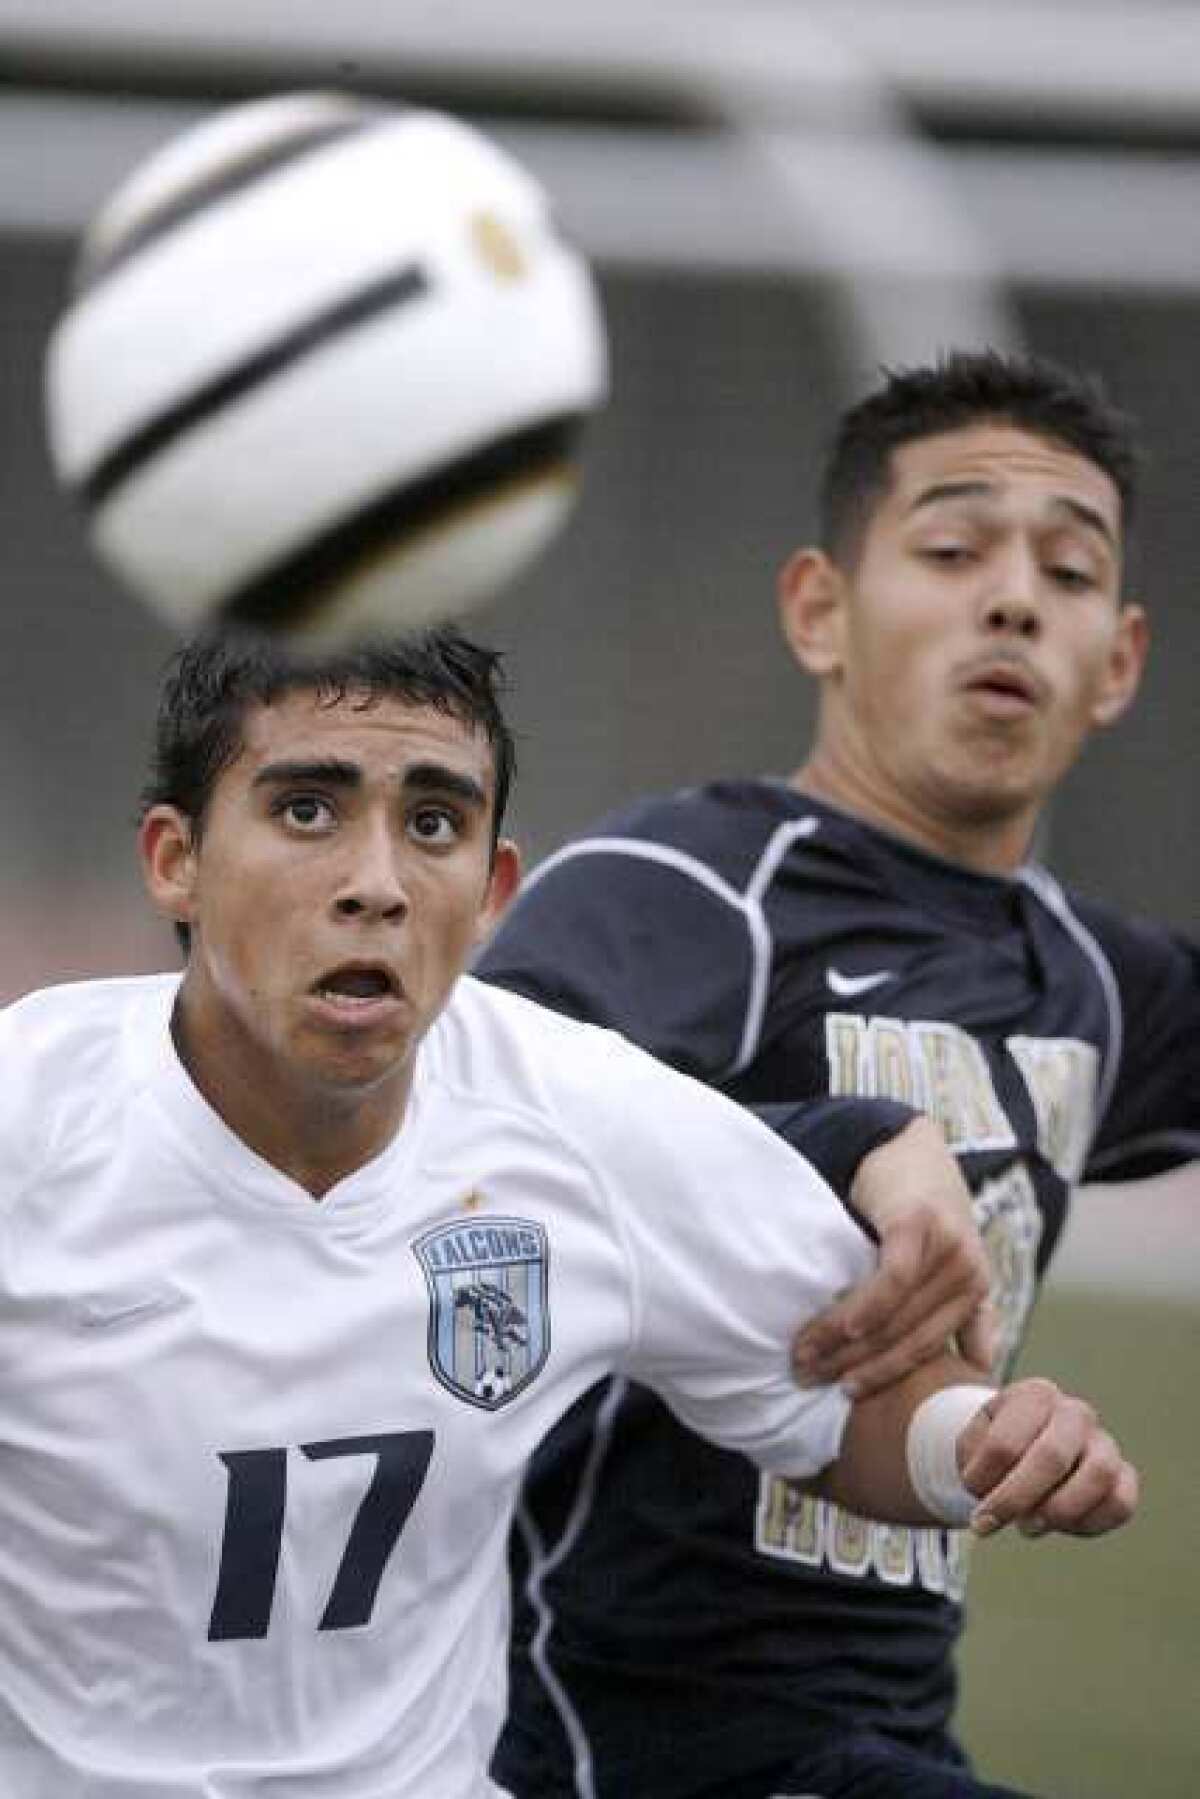 Crescenta Valley High School's #17 Pablo Sotillo keeps his eye on the ball during home game vs. Muir High School in La Crescenta on Friday, January 25, 2013. The game ended in a tie, 1-1.